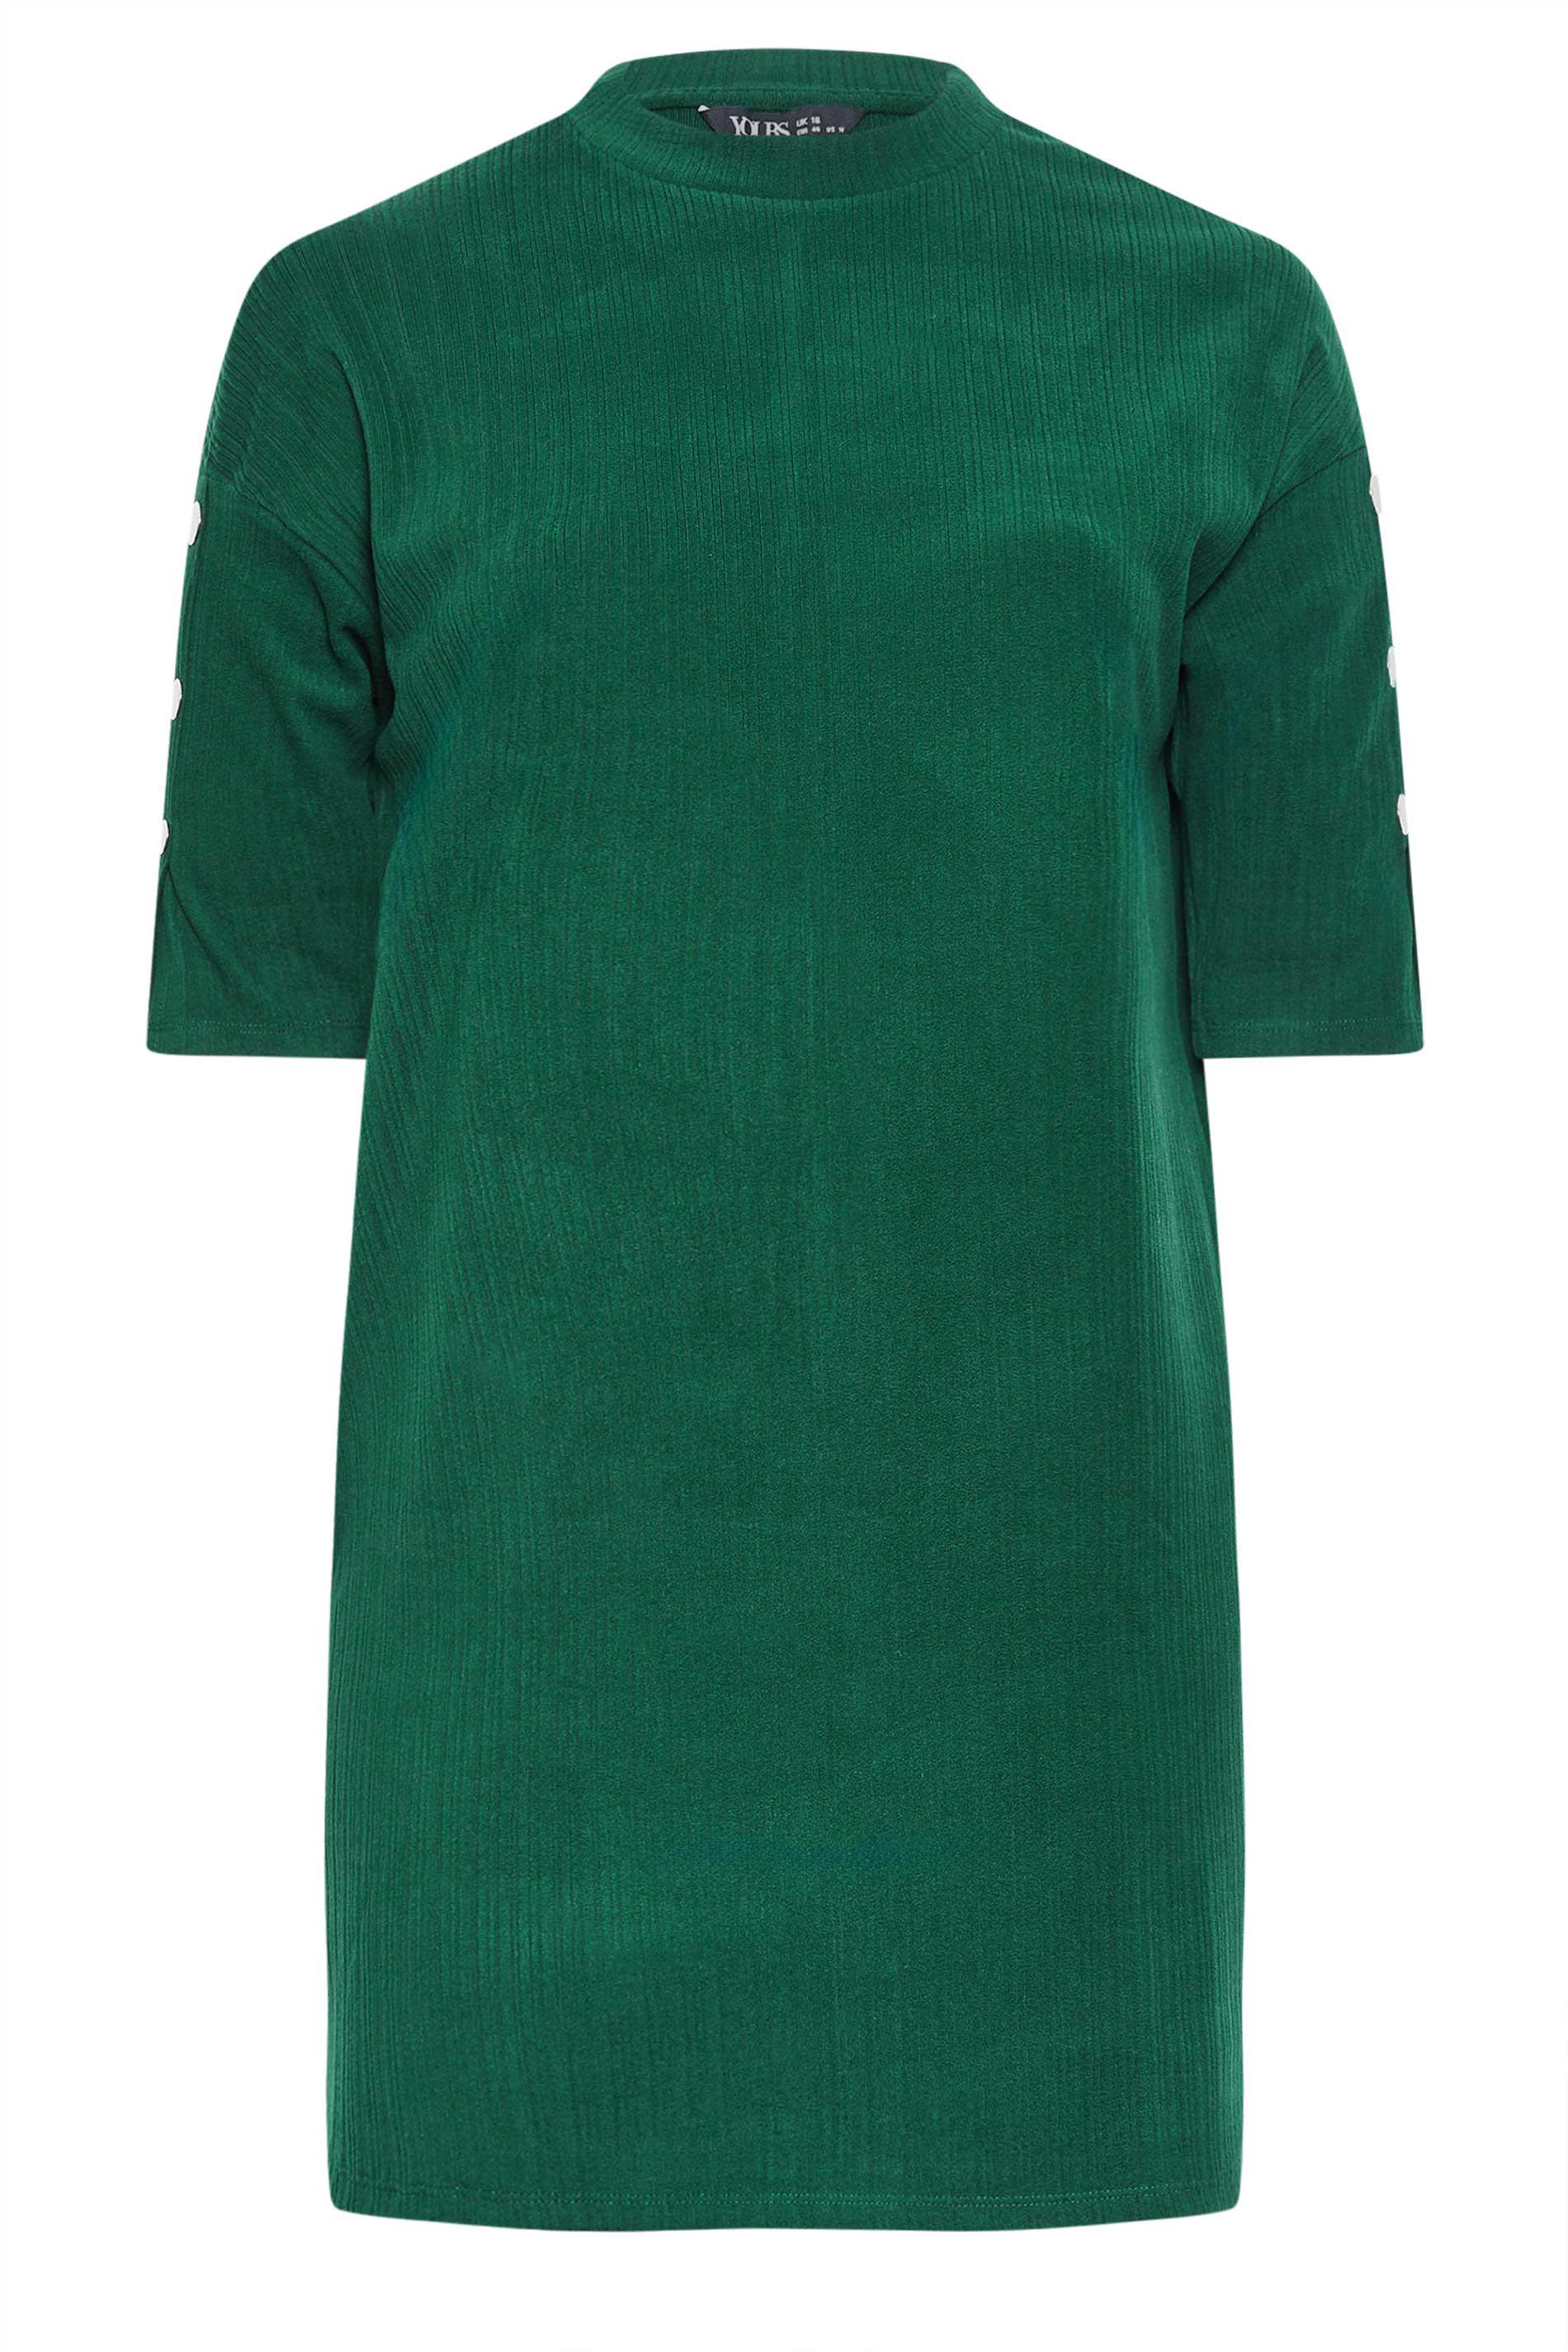 YOURS Plus Size Green Soft Touch Button Detail Mini Dress | Yours Clothing